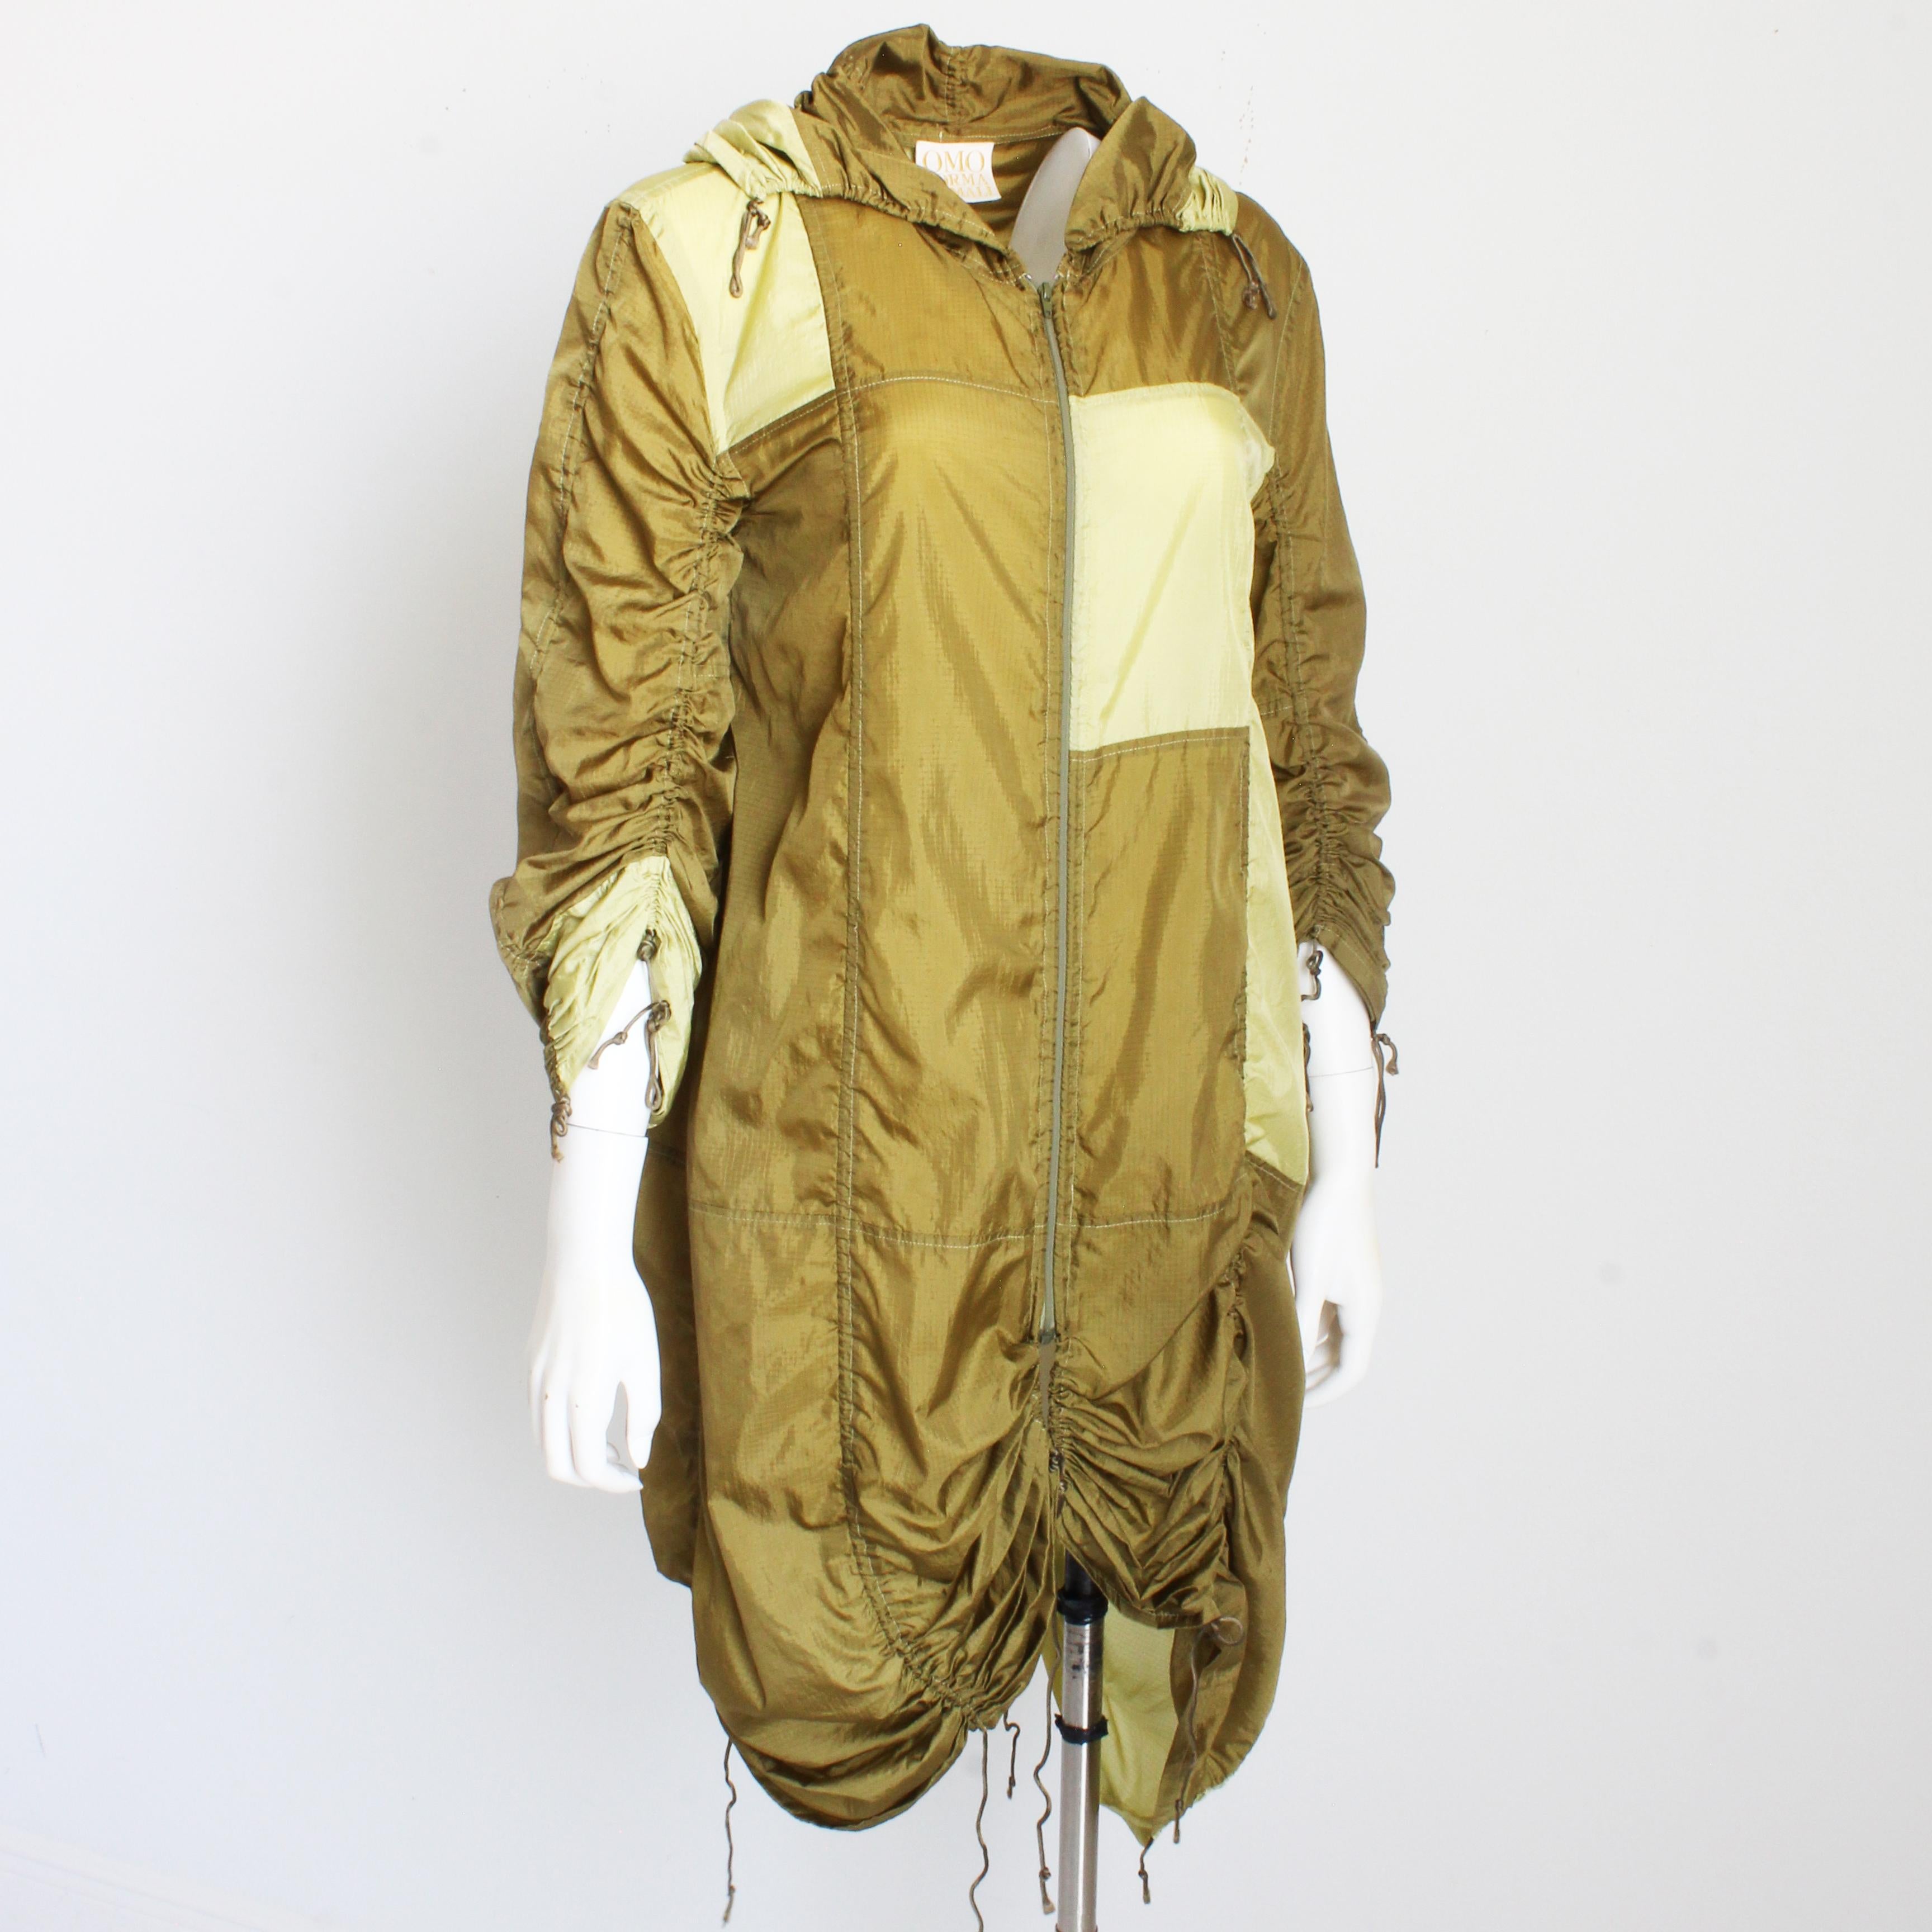 Preowned, vintage Norma Kamali parachute jacket, likely made in the early 80s.  Made from Khaki green parachute fabric with a color block pattern of tan, it features vertical silken cords throughout, allowing one to scrunch, gather and adjust the